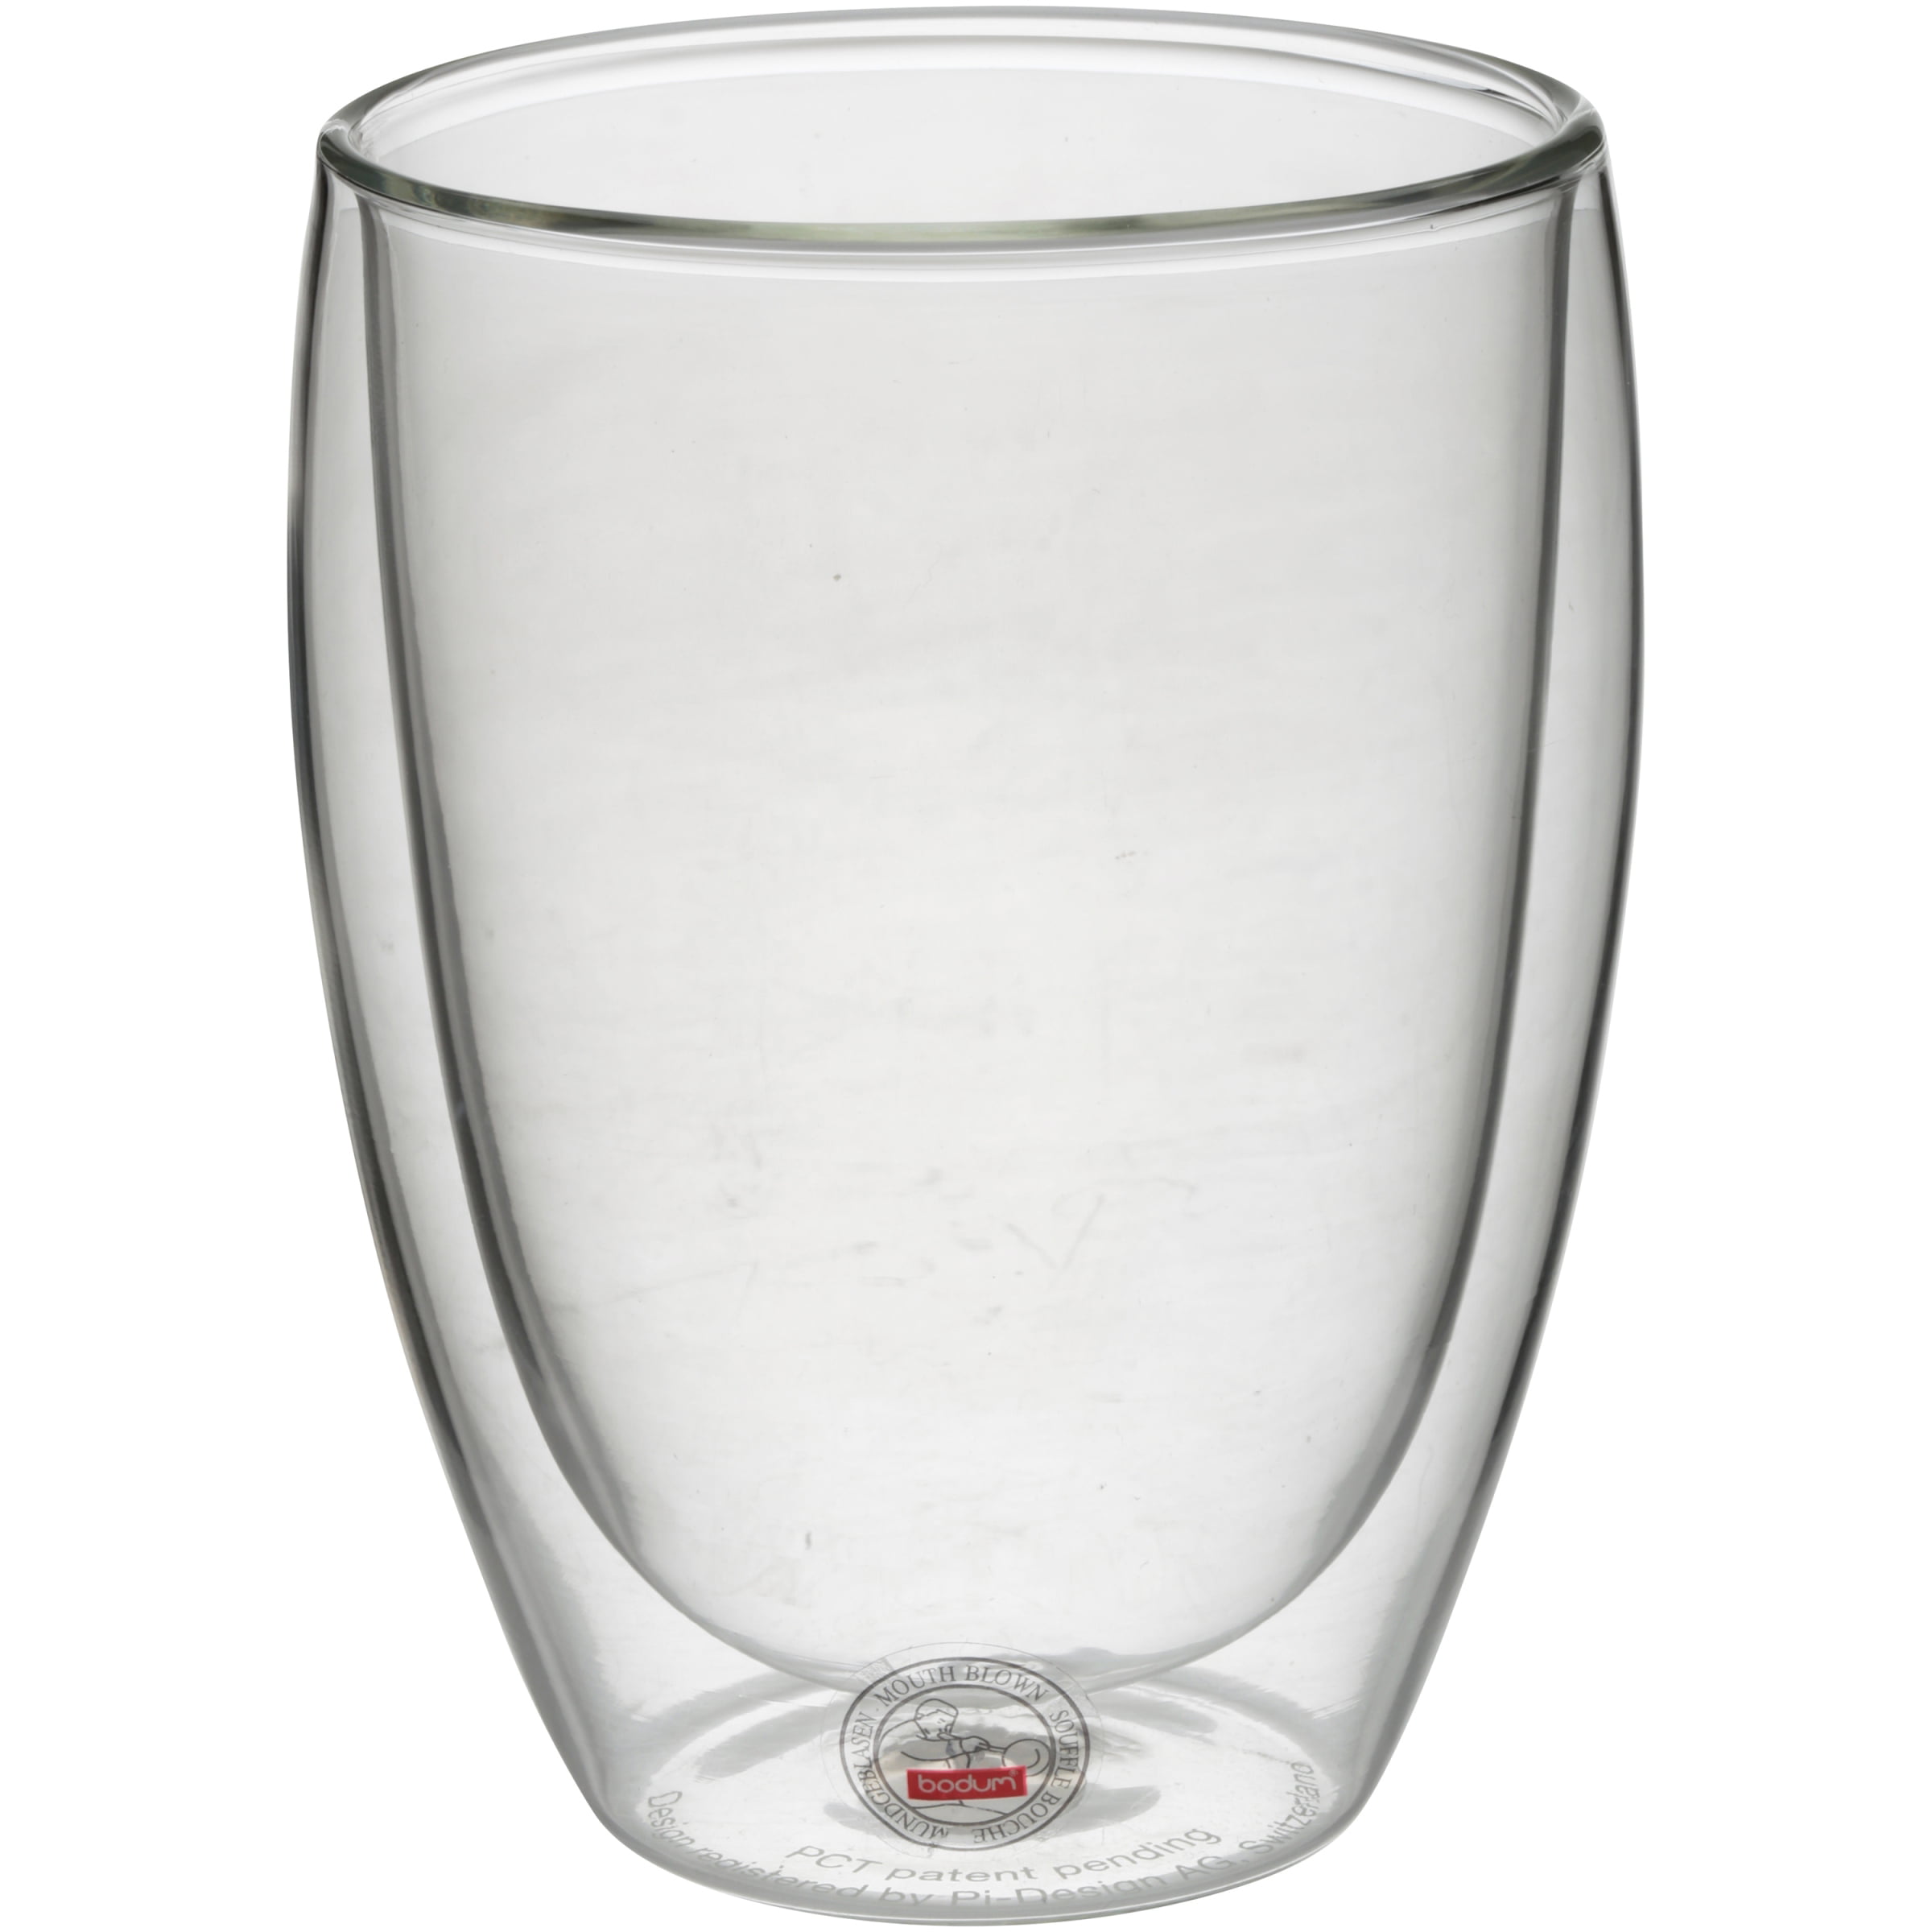 Bodum Pavina 2 Double Wall Glasses Coated with Silicone 0.35 L, 12 oz Milk White